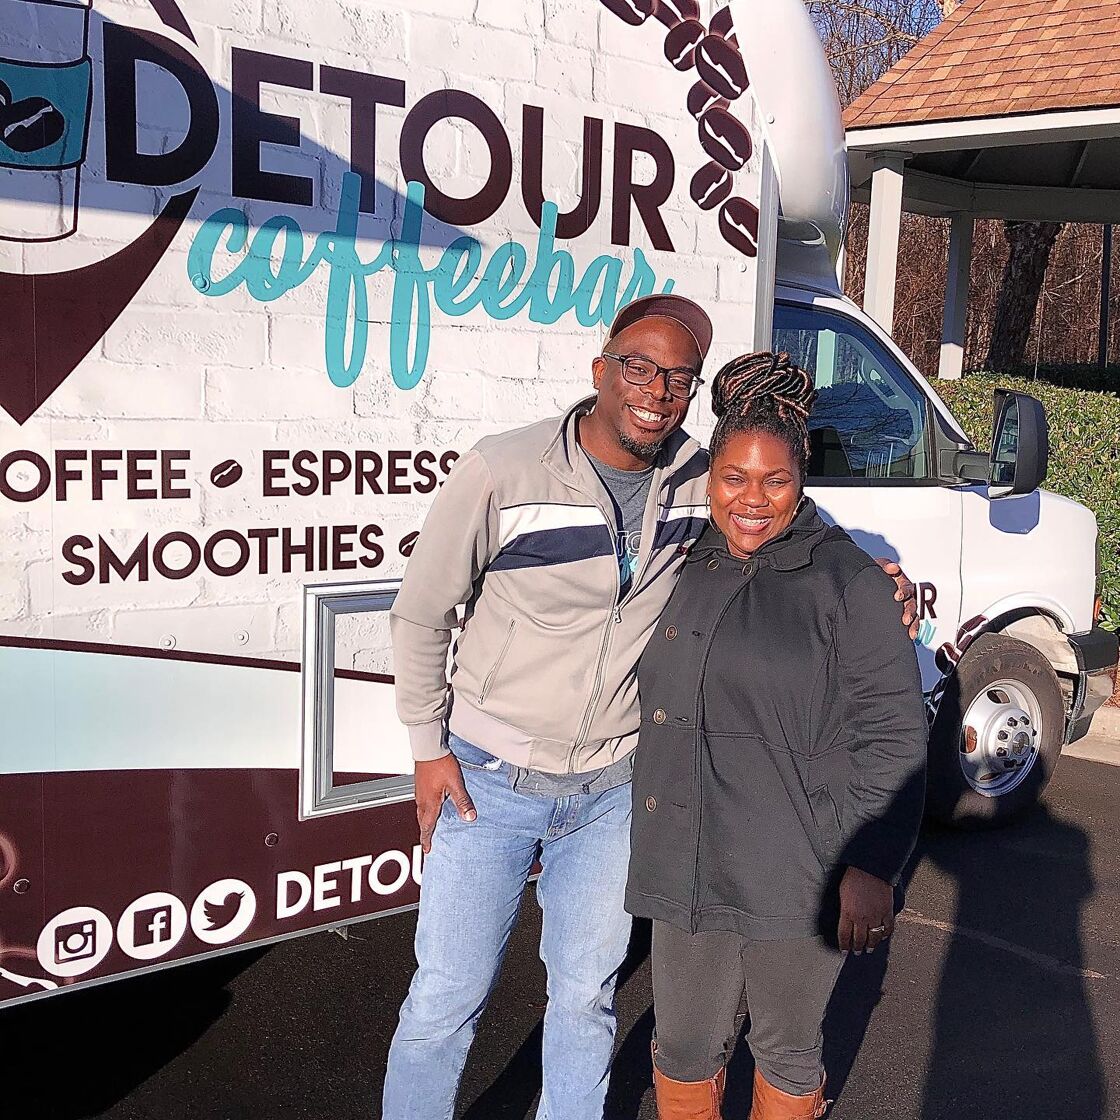 Two smiling black people embrace in front of the Detour Coffeebar truck in Charlotte North Carolina.